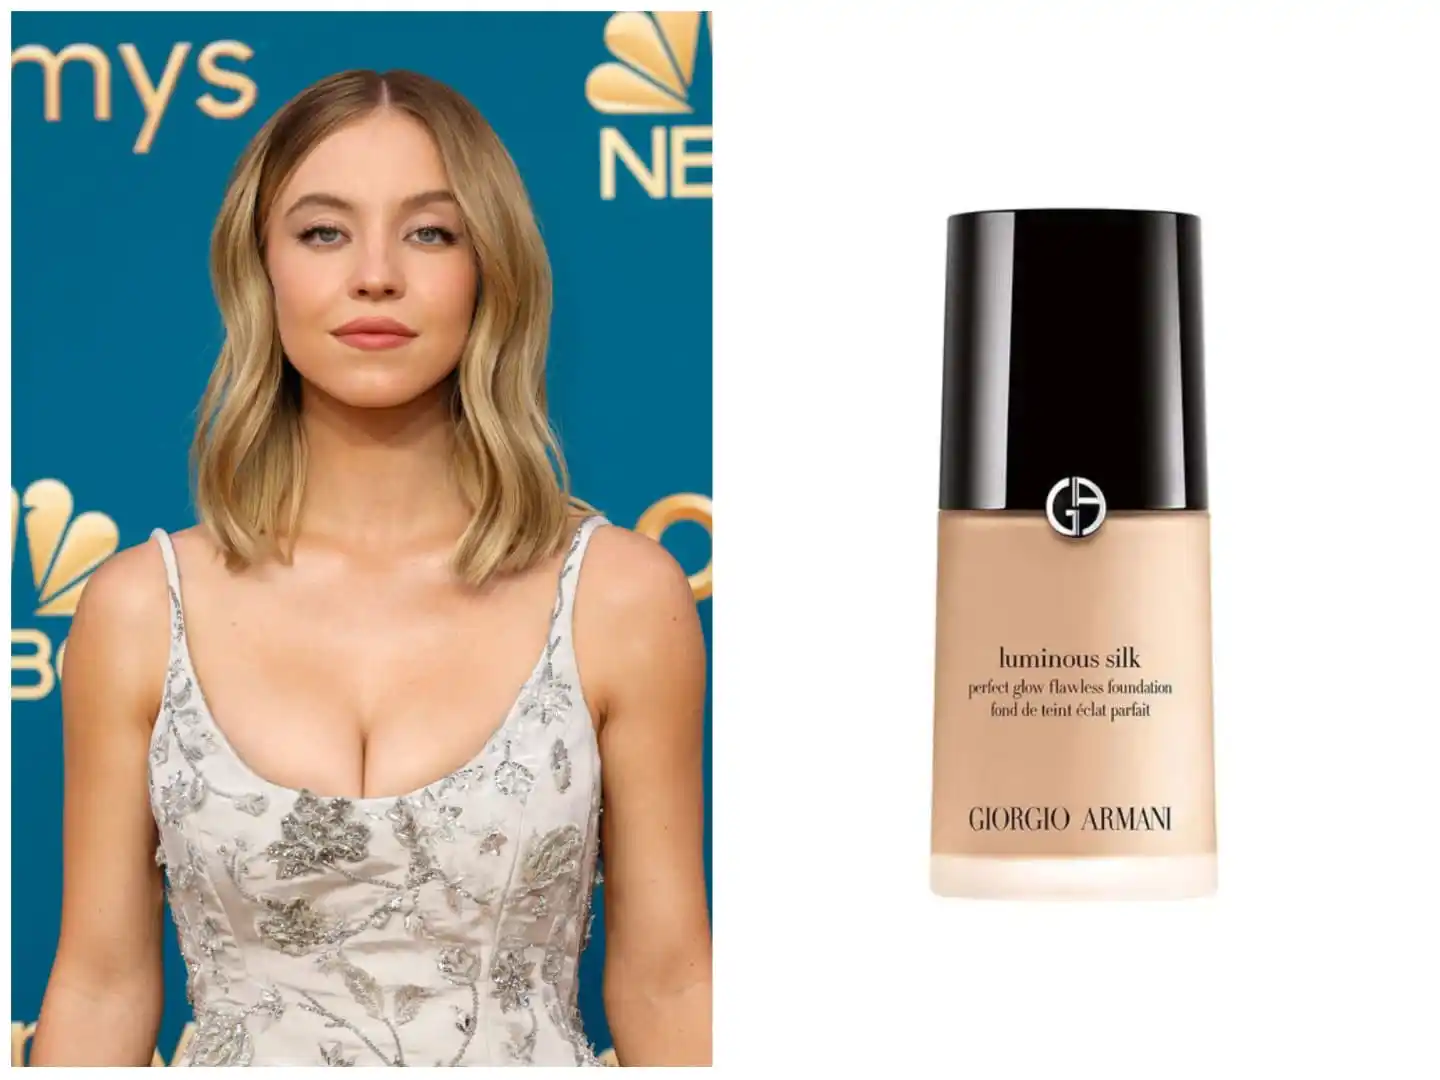 This is how Sydney Sweeney created her Emmys red carpet look